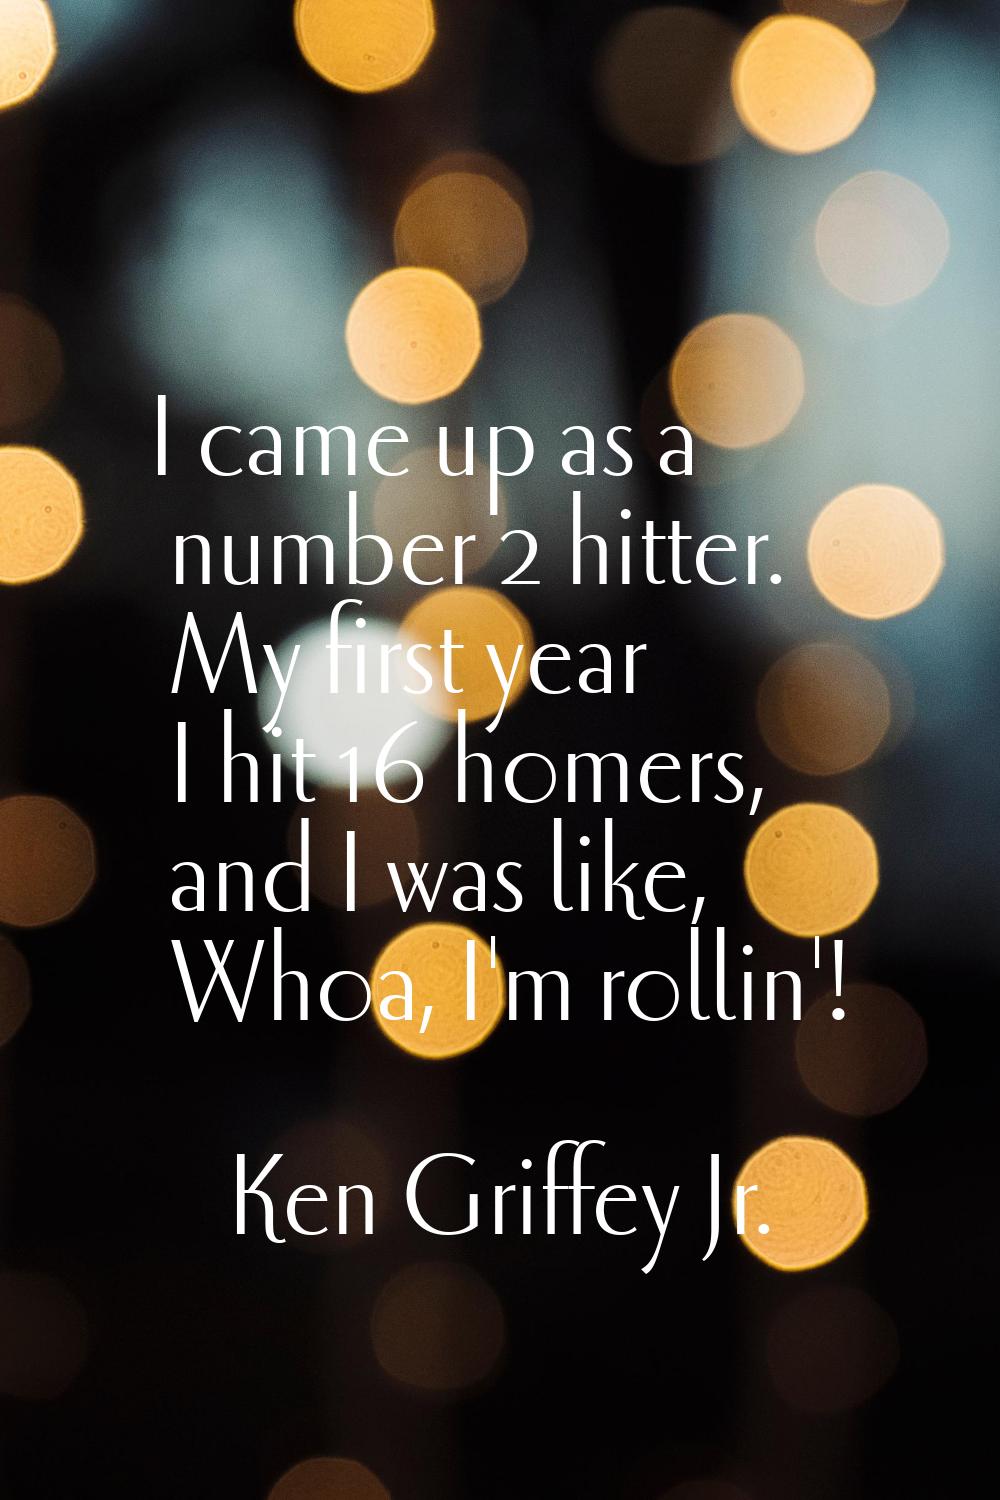 I came up as a number 2 hitter. My first year I hit 16 homers, and I was like, Whoa, I'm rollin'!